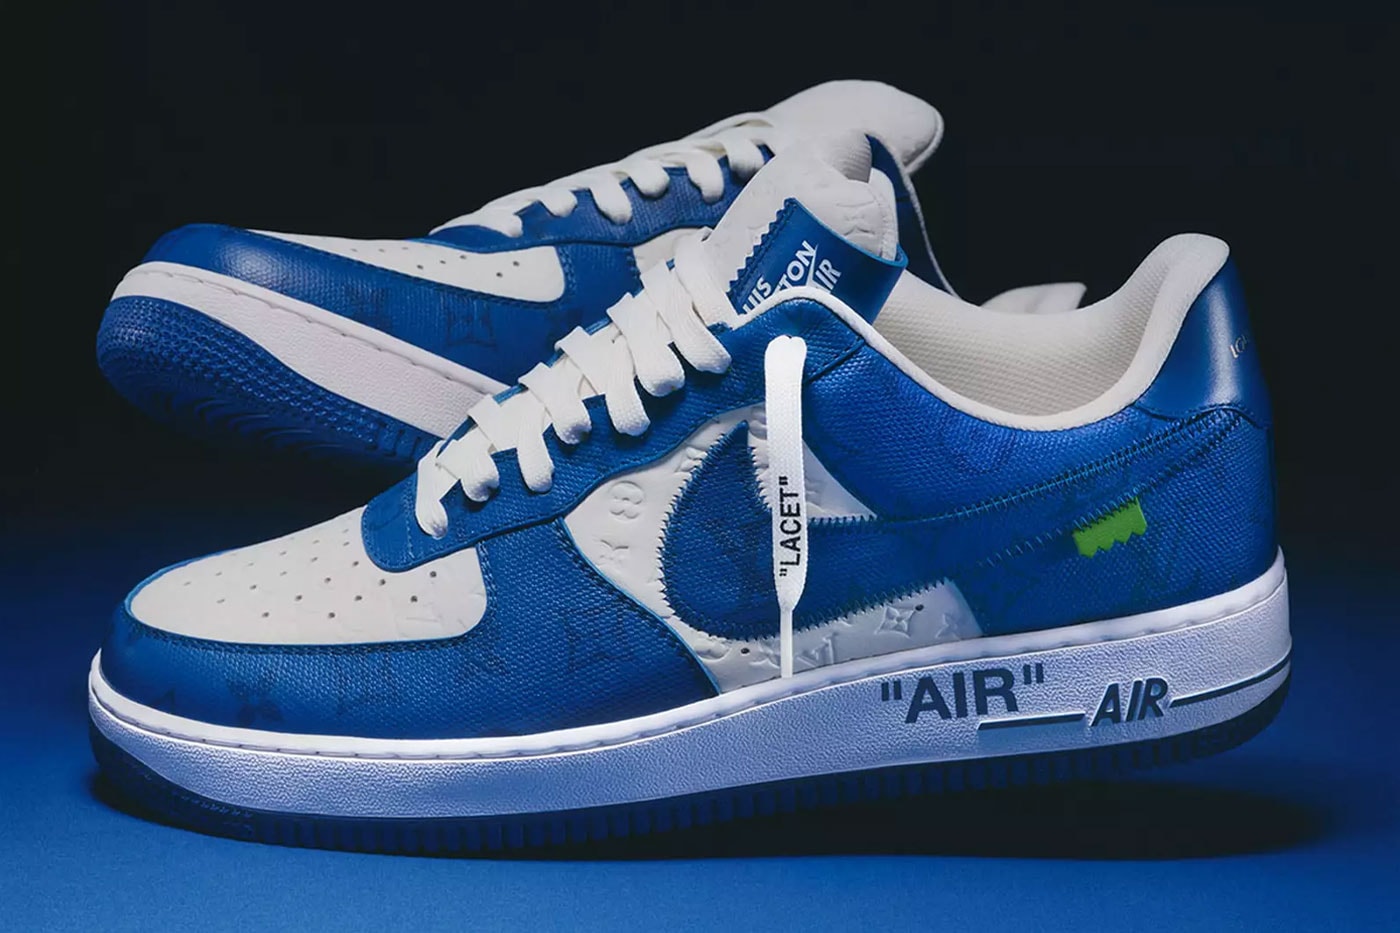 Louis Vuitton Opens an Exhibit for Virgil Abloh's Nike Air Force 1 Collaboration nike af1 new york city nyc